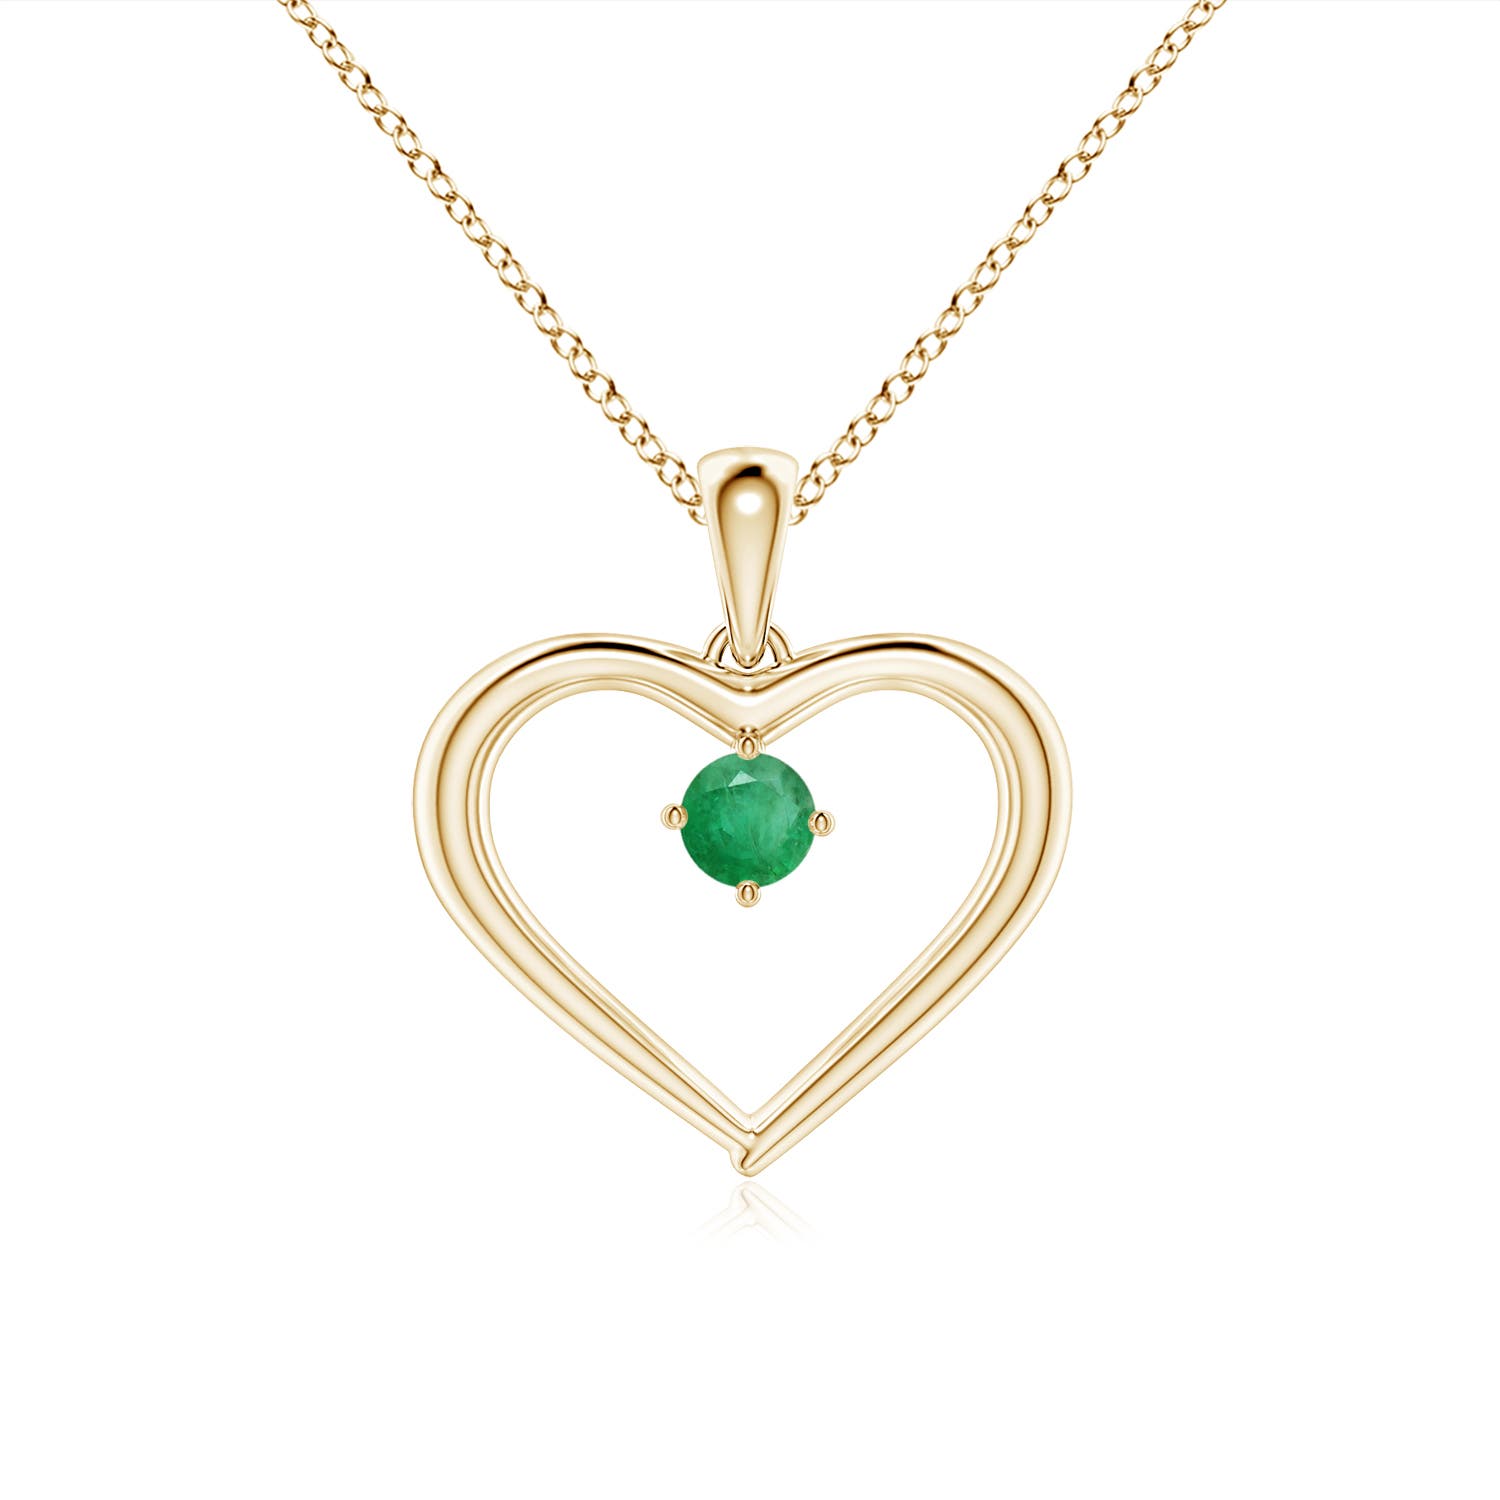 A - Emerald / 0.1 CT / 14 KT Yellow Gold